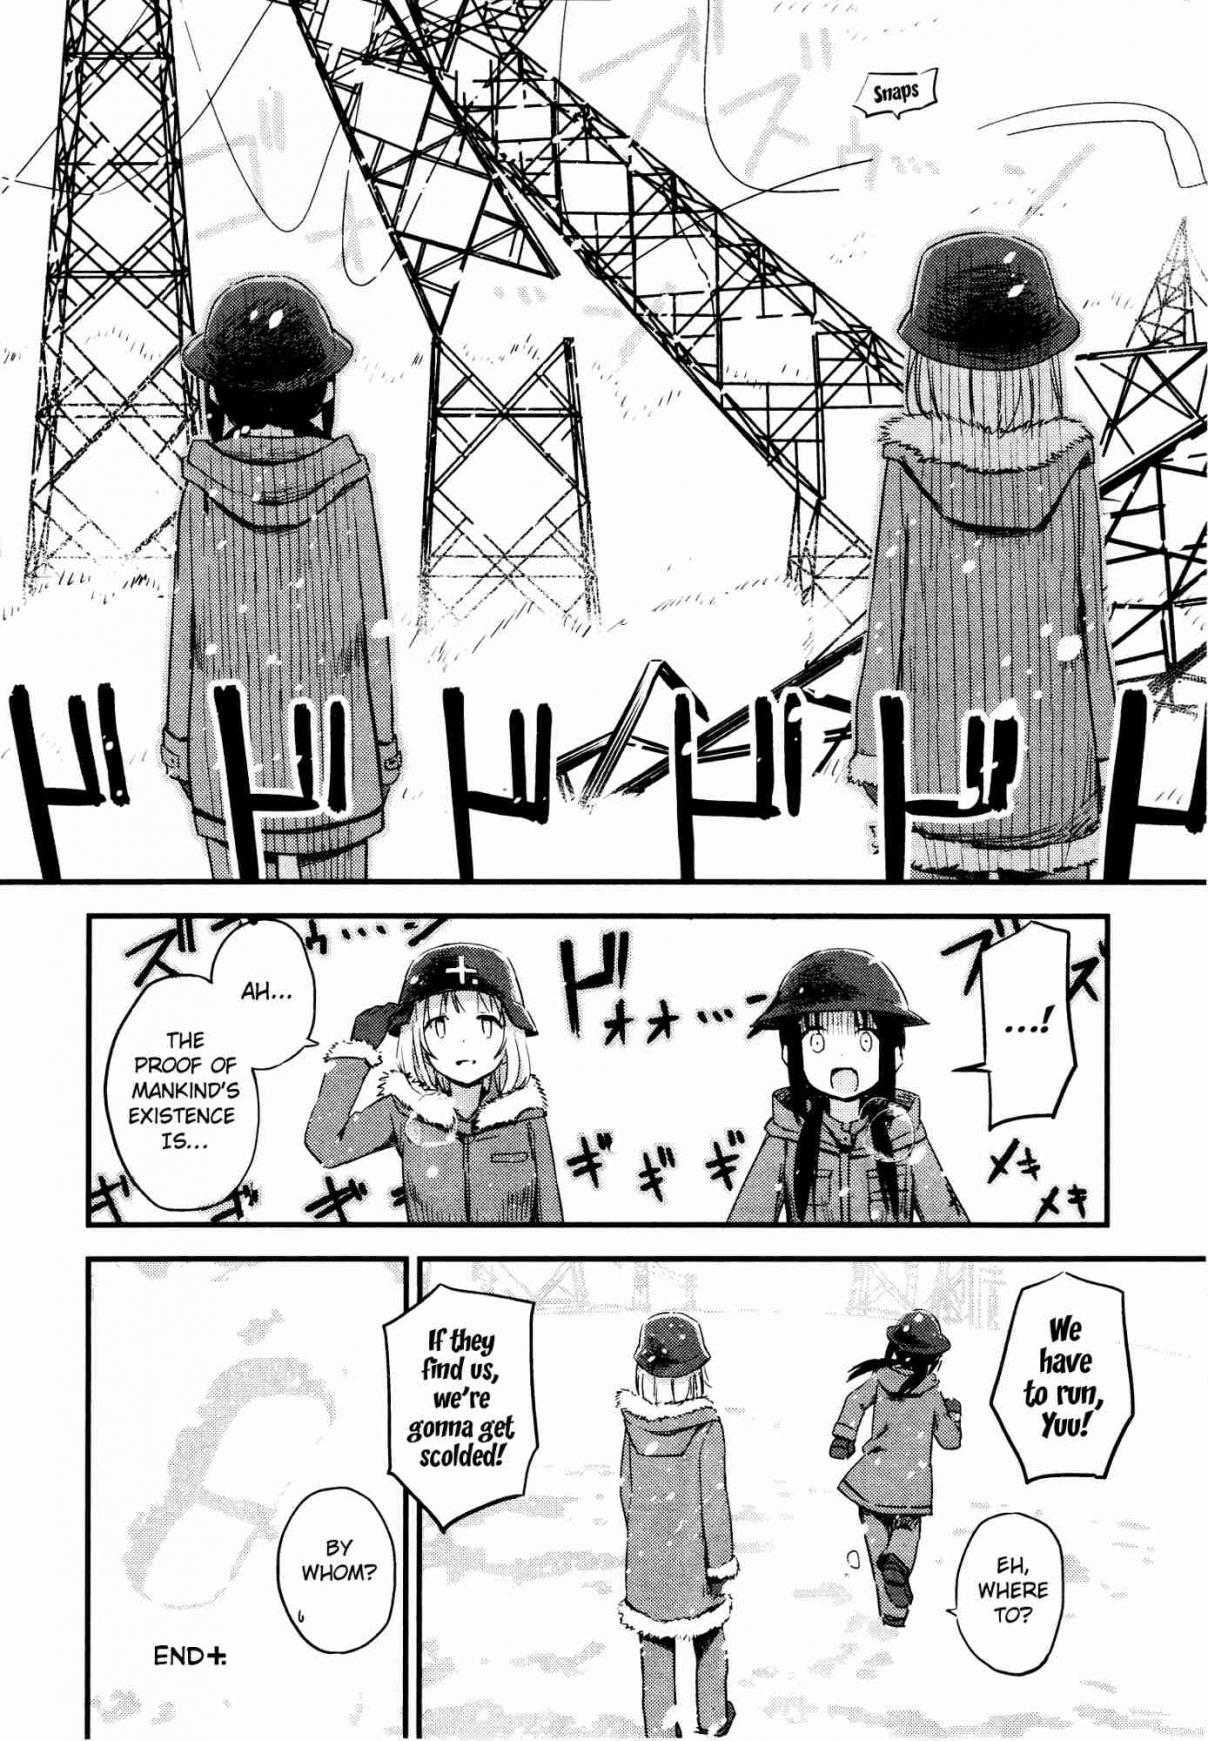 Girls' Last Tour Official Anthology Comic Ch. 8 Post Apocalyptic Proof of Existence